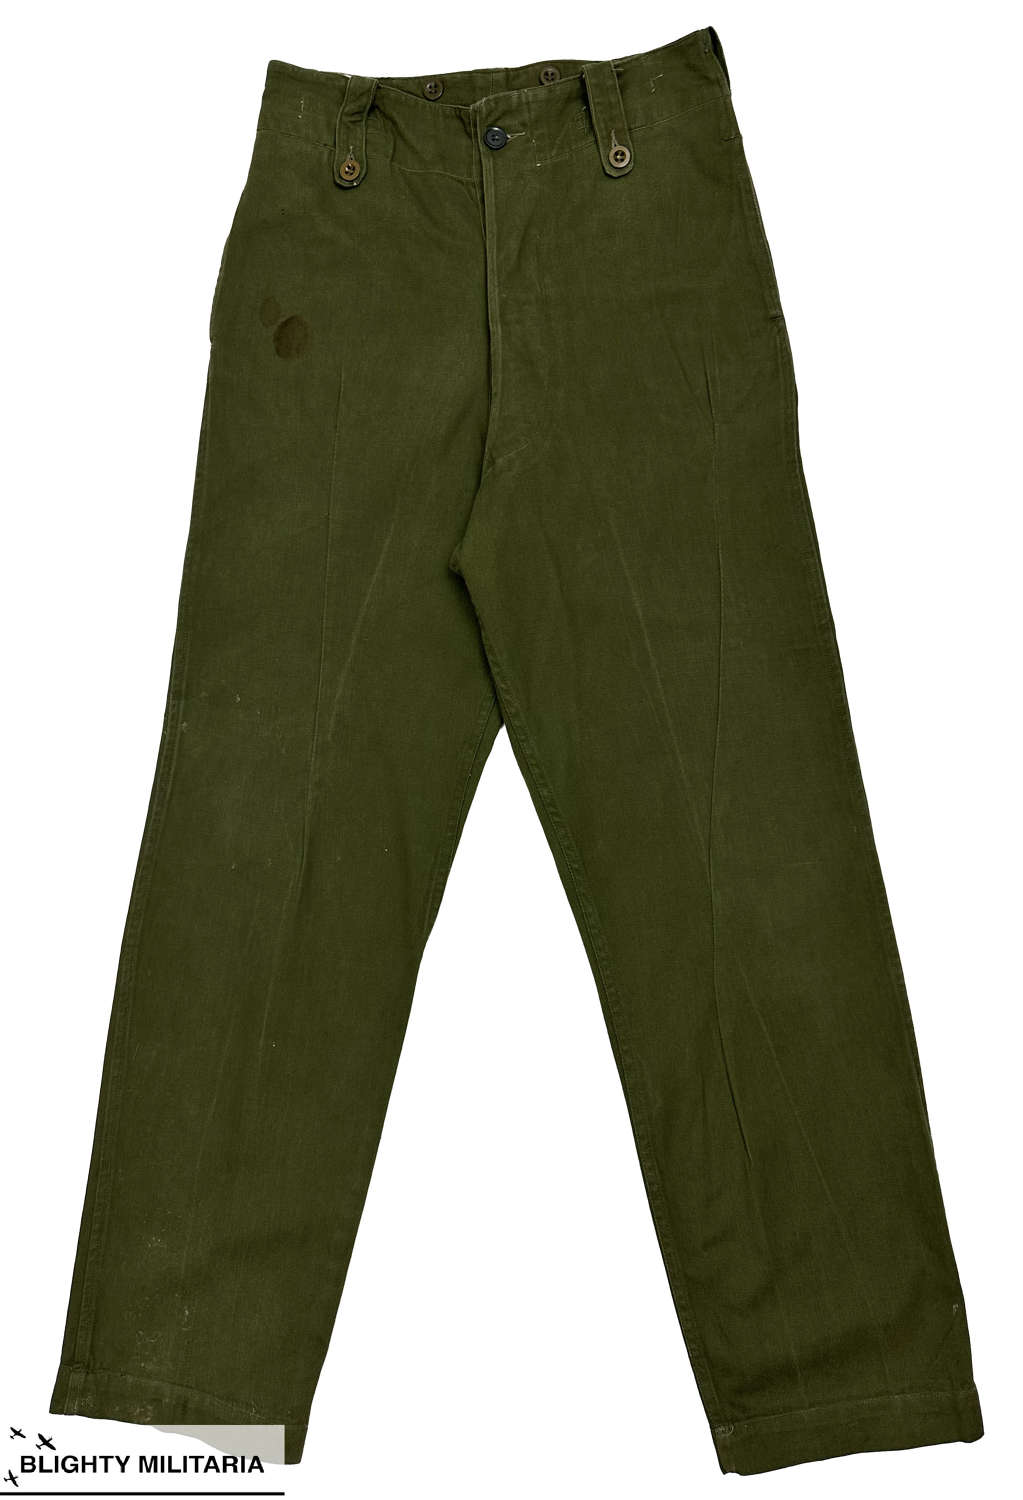 Original 1966 Dated Overall Green Trousers - Size 5 30 x 31